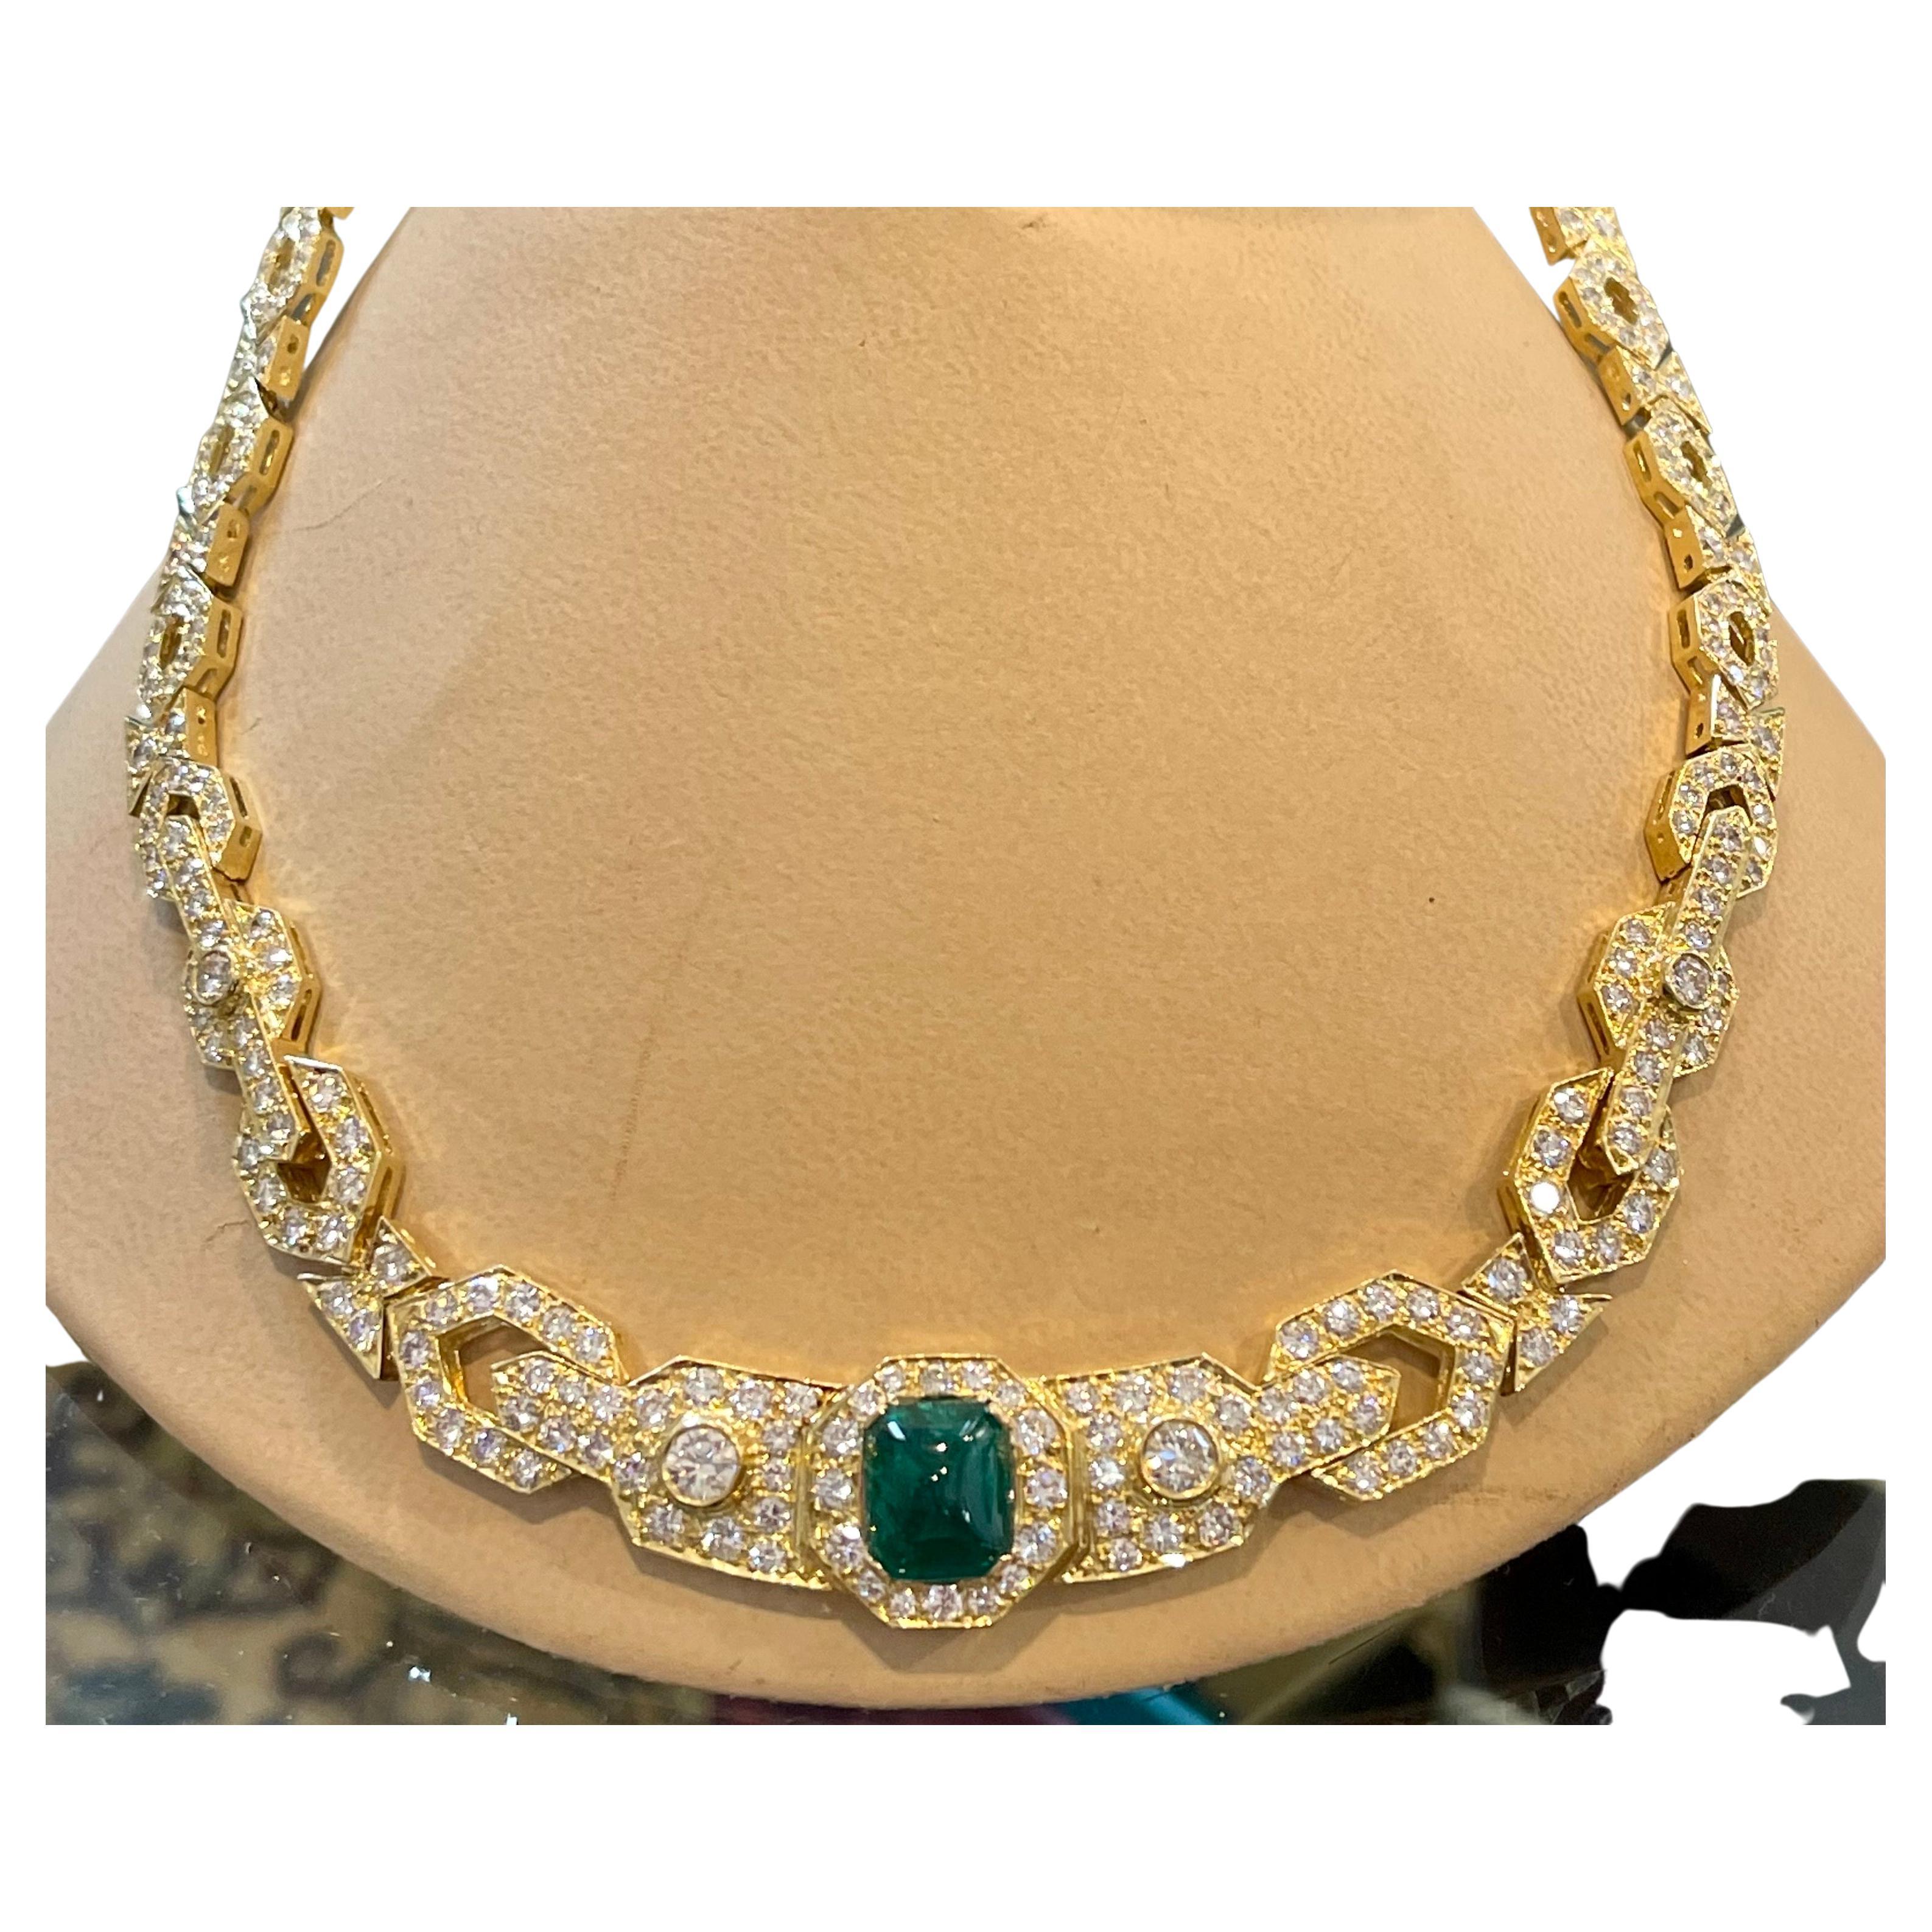 GIA Certified 7 Ct Sugar Loaf Cabochon Colombian Emerald Diamond Necklace 18KYG In Excellent Condition For Sale In New York, NY